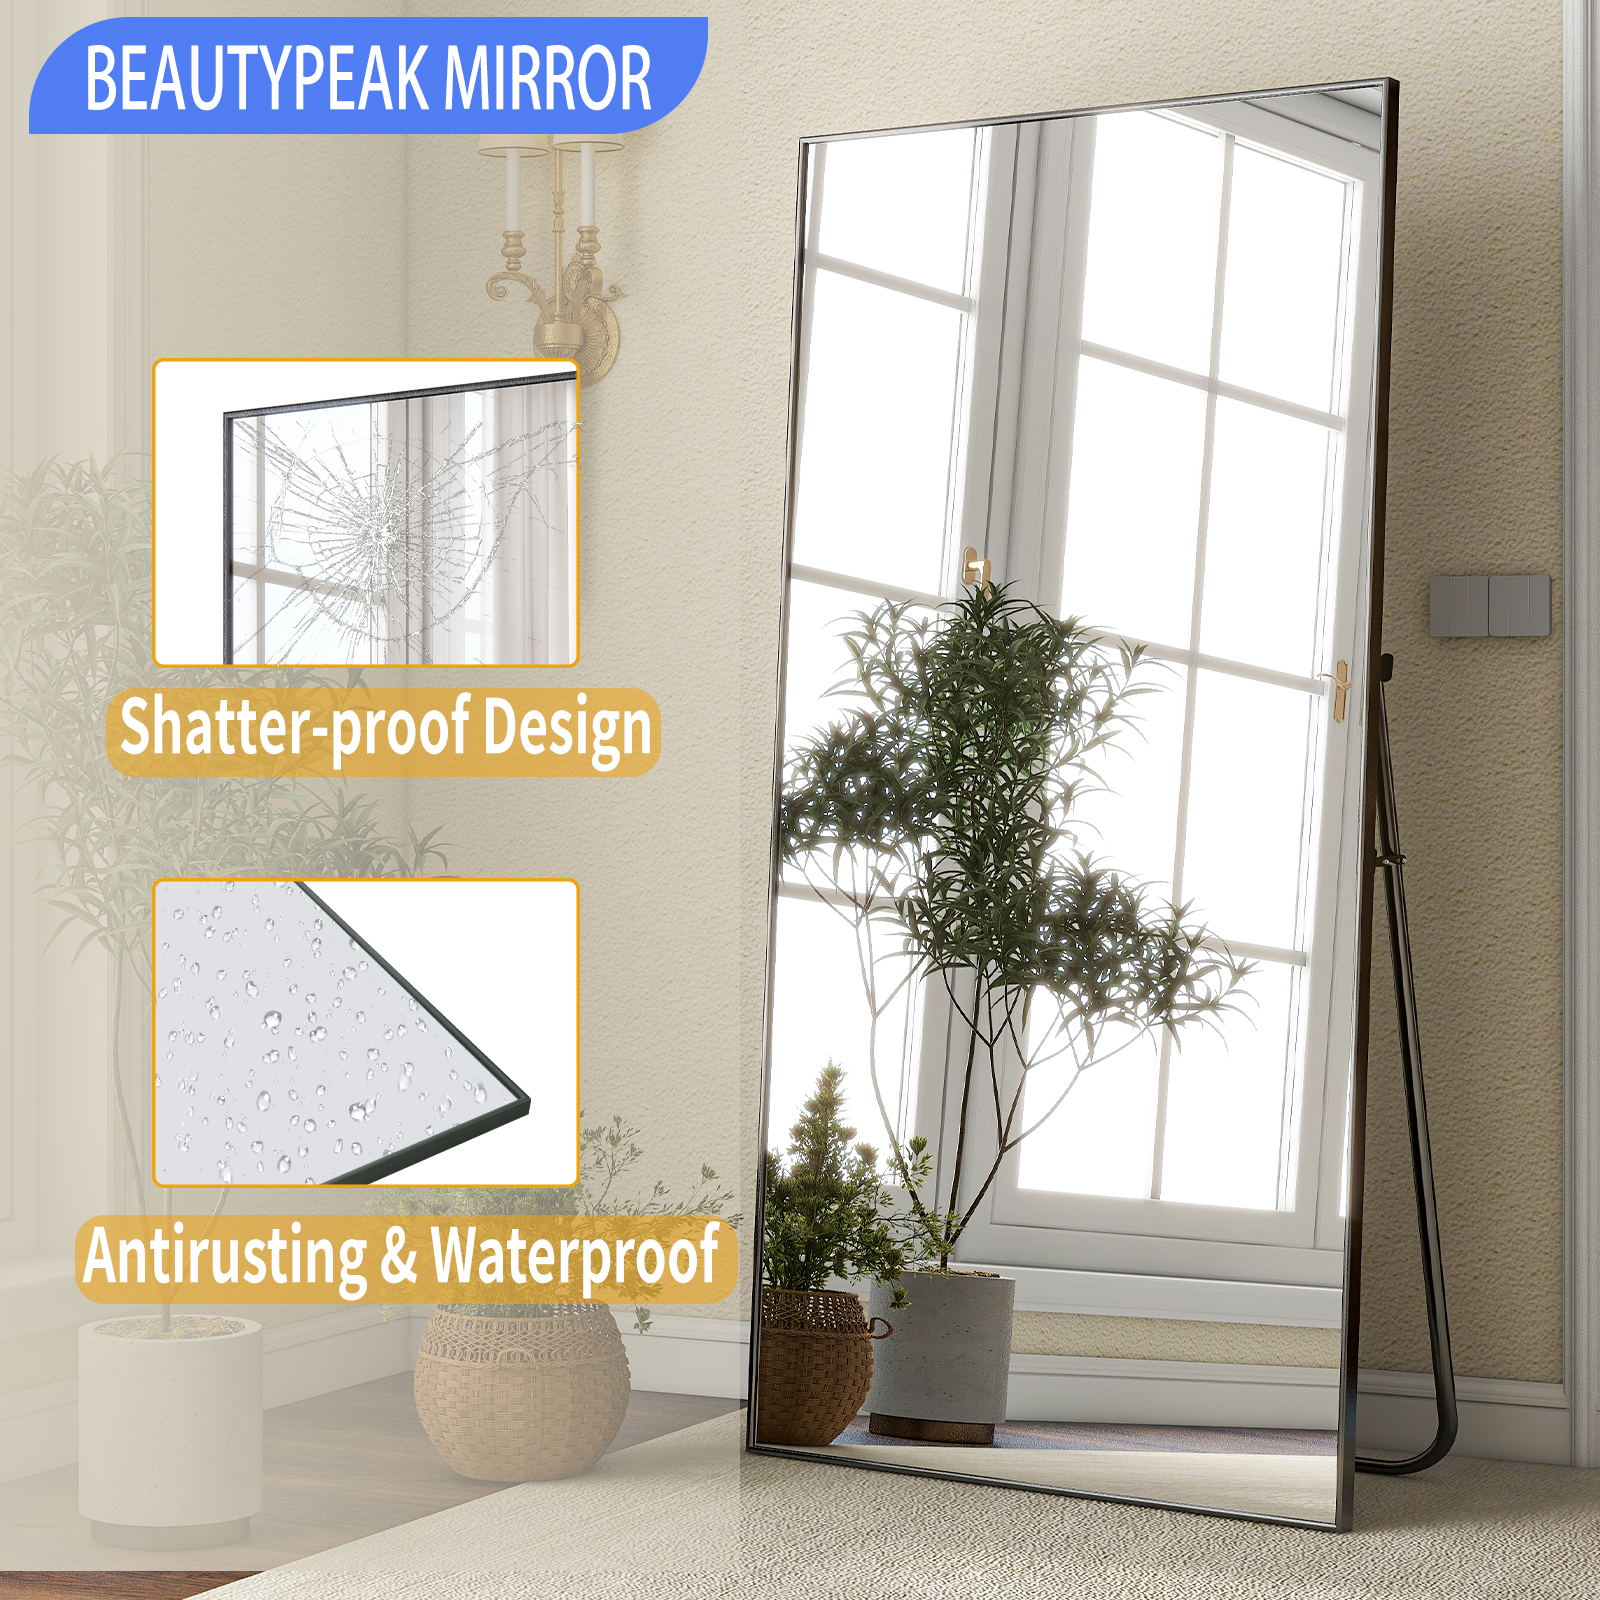 BEAUTYPEAK 76"x34" Full Length Mirror Rectangle Floor Mirrors for Standing Leaning or Hanging, Black - image 2 of 6